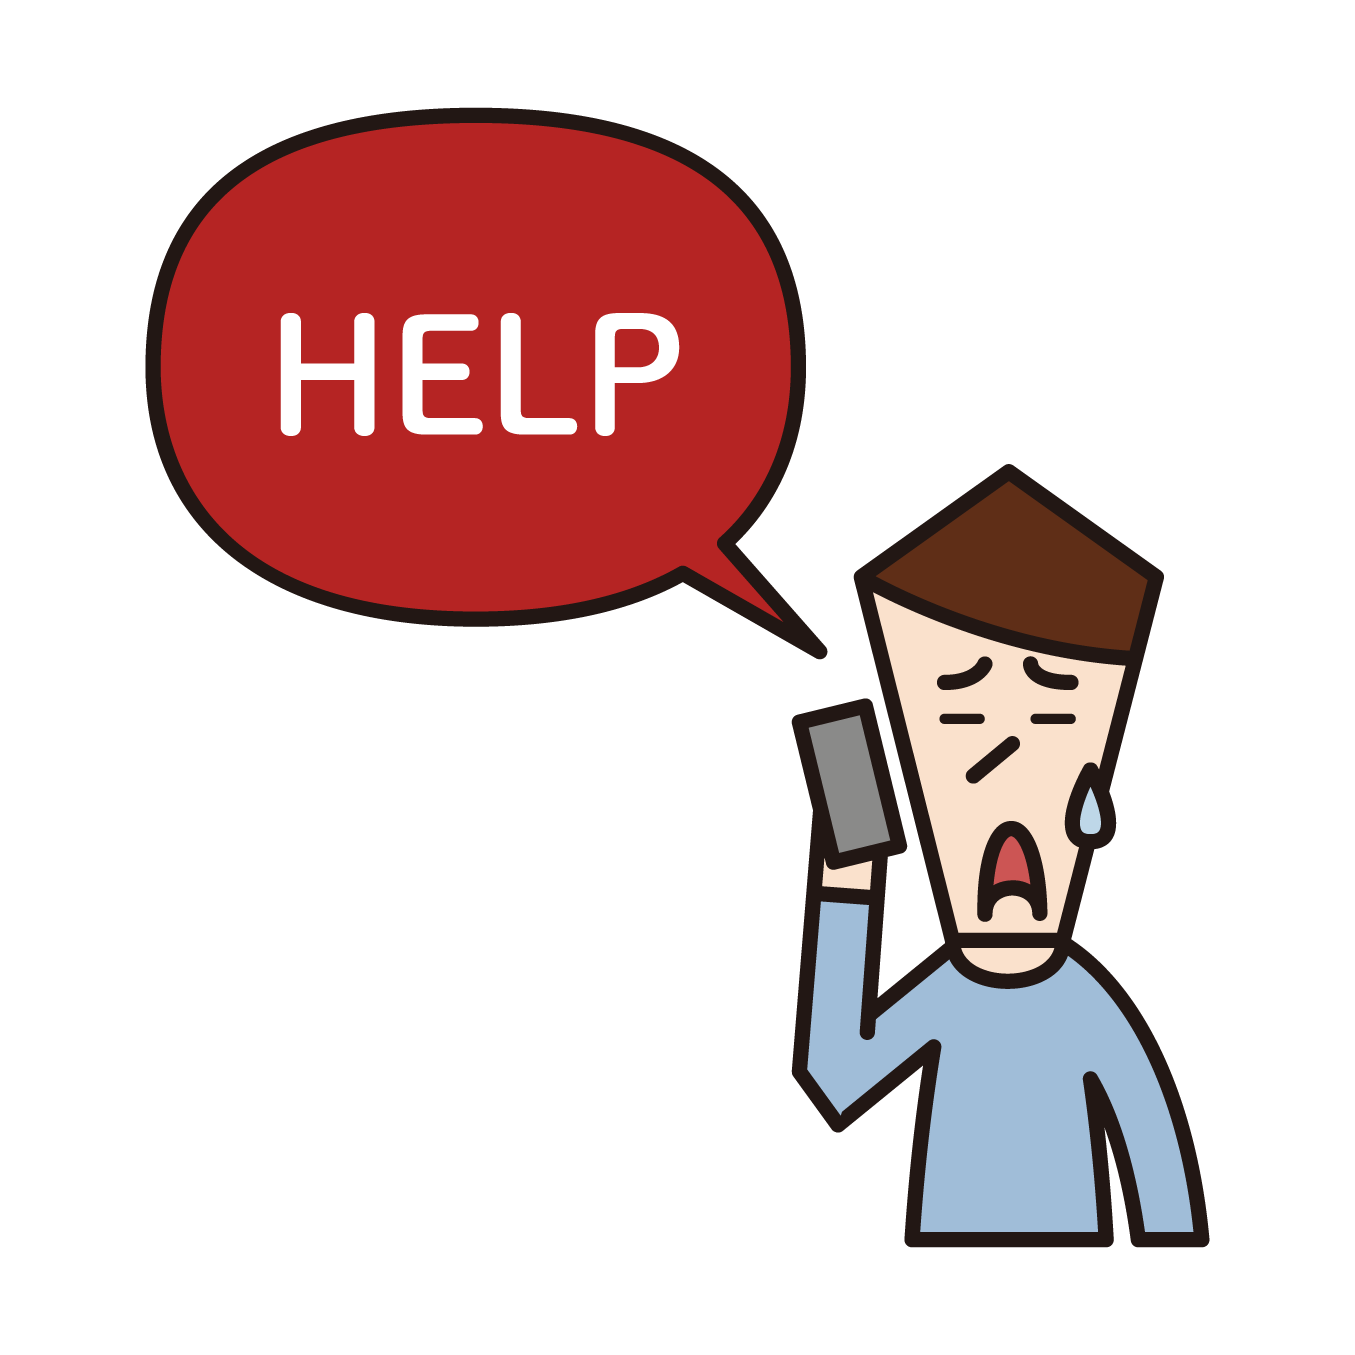 Illustration of a man asking for help over the phone